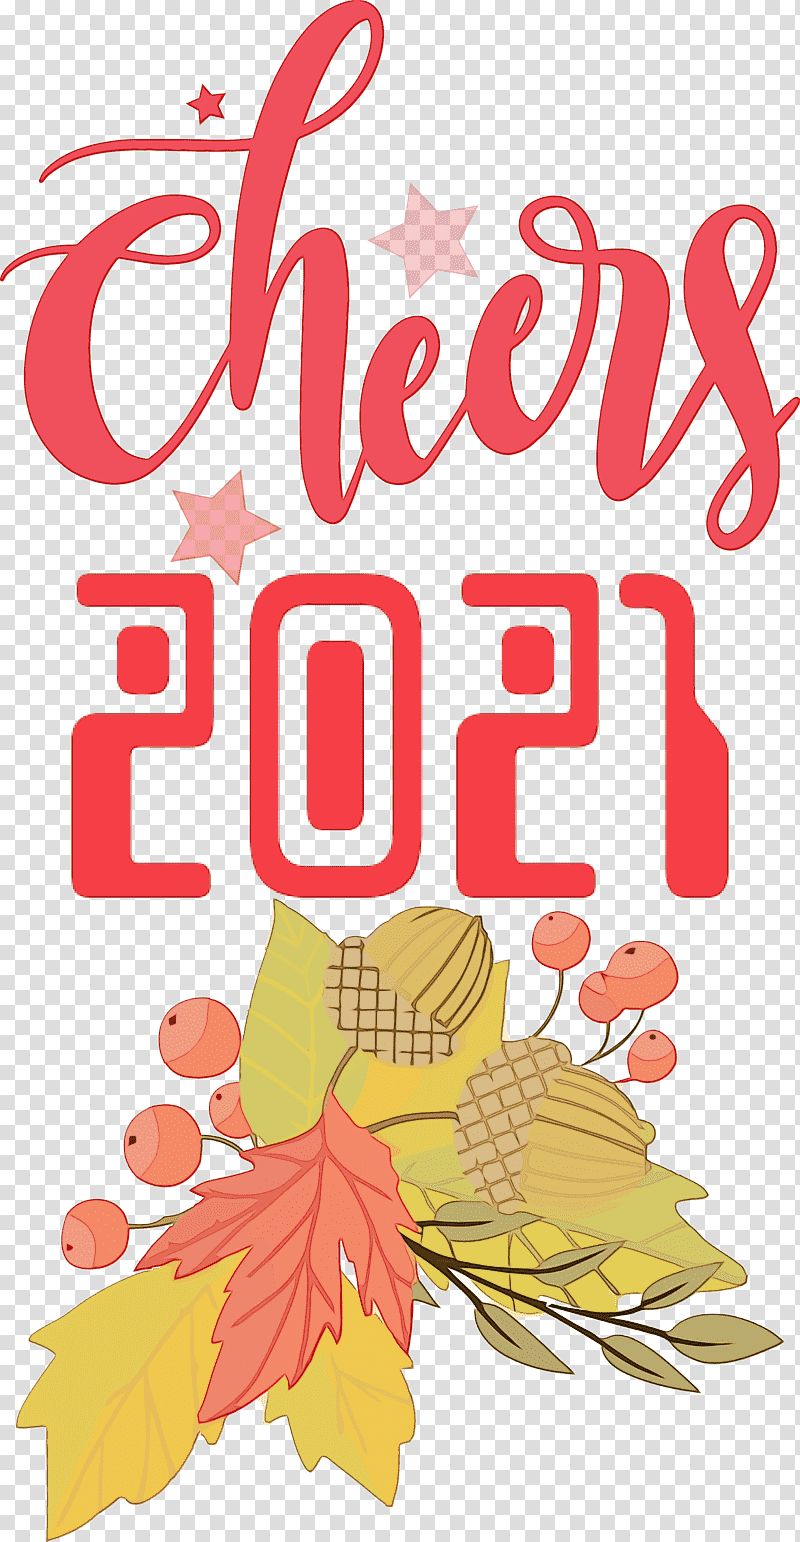 Floral design, Cheers 2021 New Year, Watercolor, Paint, Wet Ink, Leaf, Petal transparent background PNG clipart